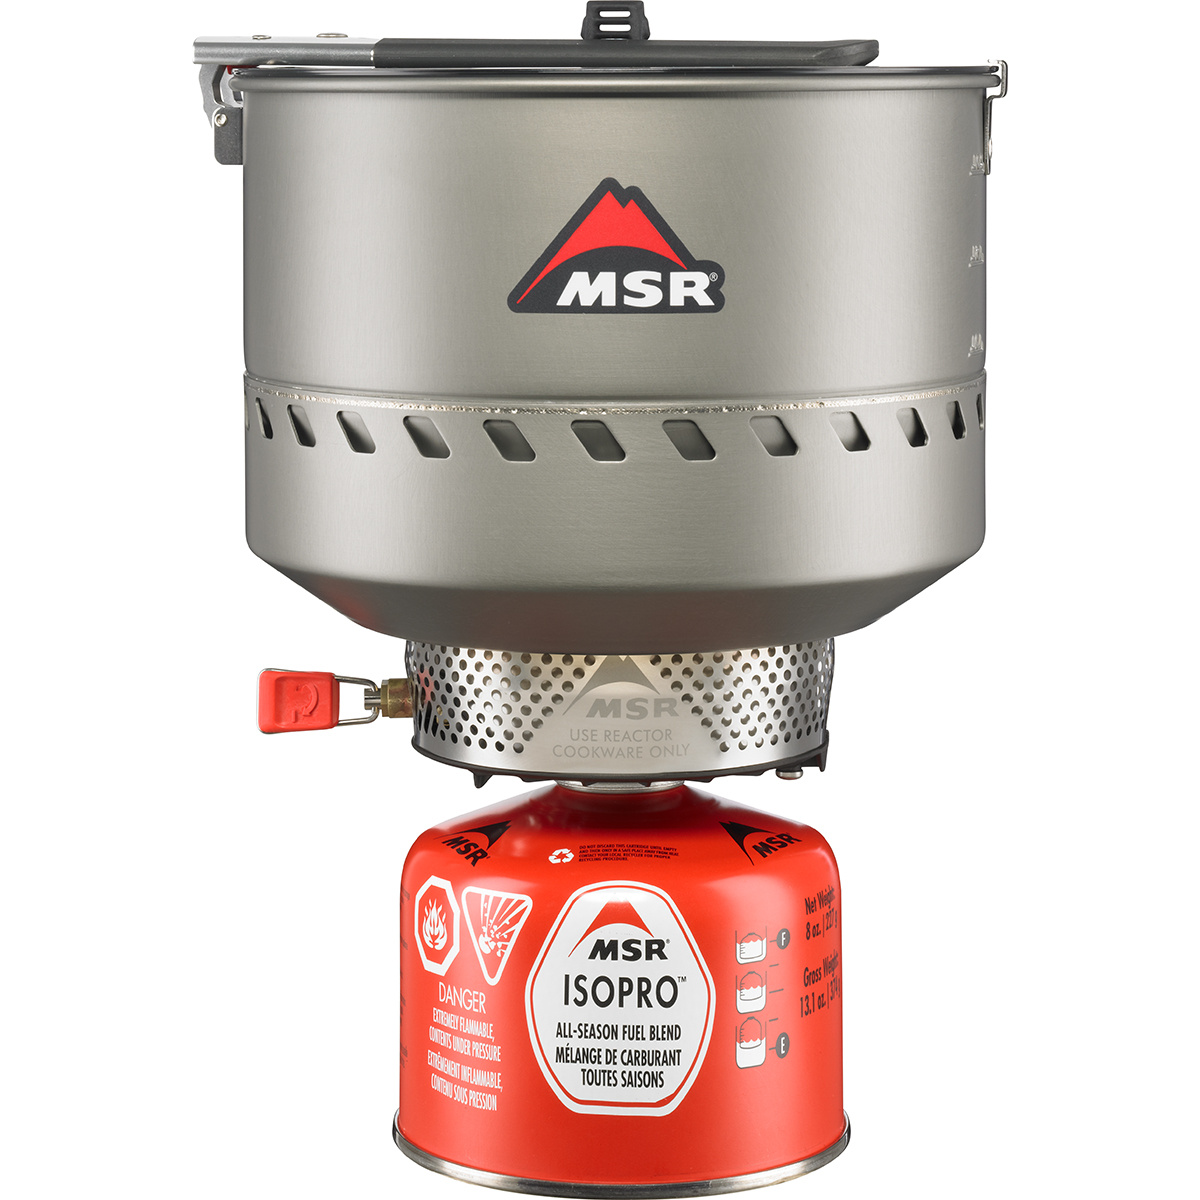 Image of MSR Fornello Reactor 2.5l Stove System